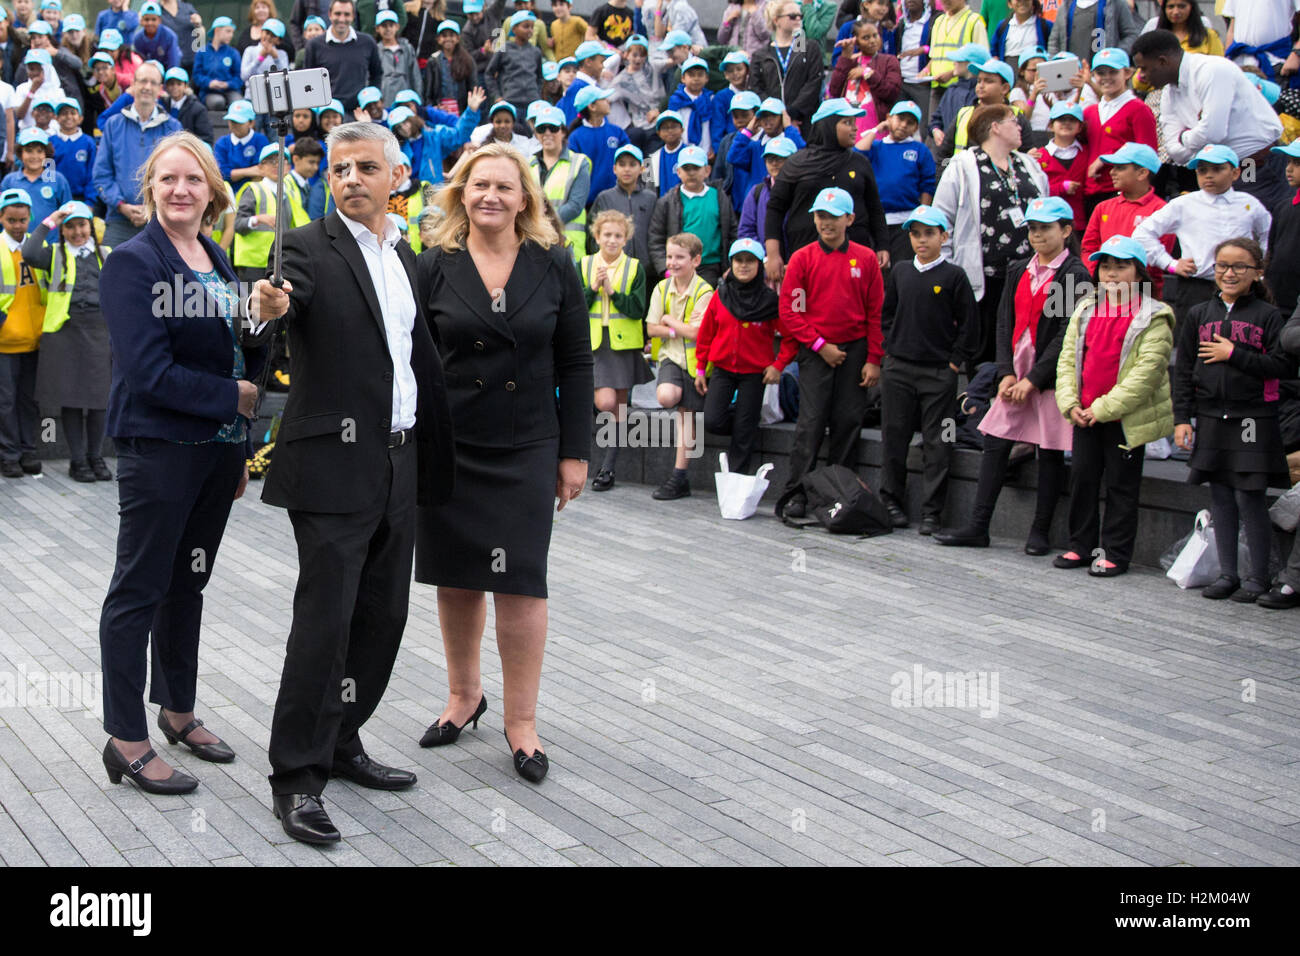 London, UK. 29th Sep, 2016. The Mayor of London, Sadiq Khan, takes a selfie with Darcey Bussell, Joanne McCartney (Deputy Mayor for Education), Yelena Baturina (founder of the Be Open Foundation) and hundreds of schoolchildren after launching the new London Curriculum for primary schools at the London Curriculum Festival at the Scoop. Credit:  Mark Kerrison/Alamy Live News Stock Photo